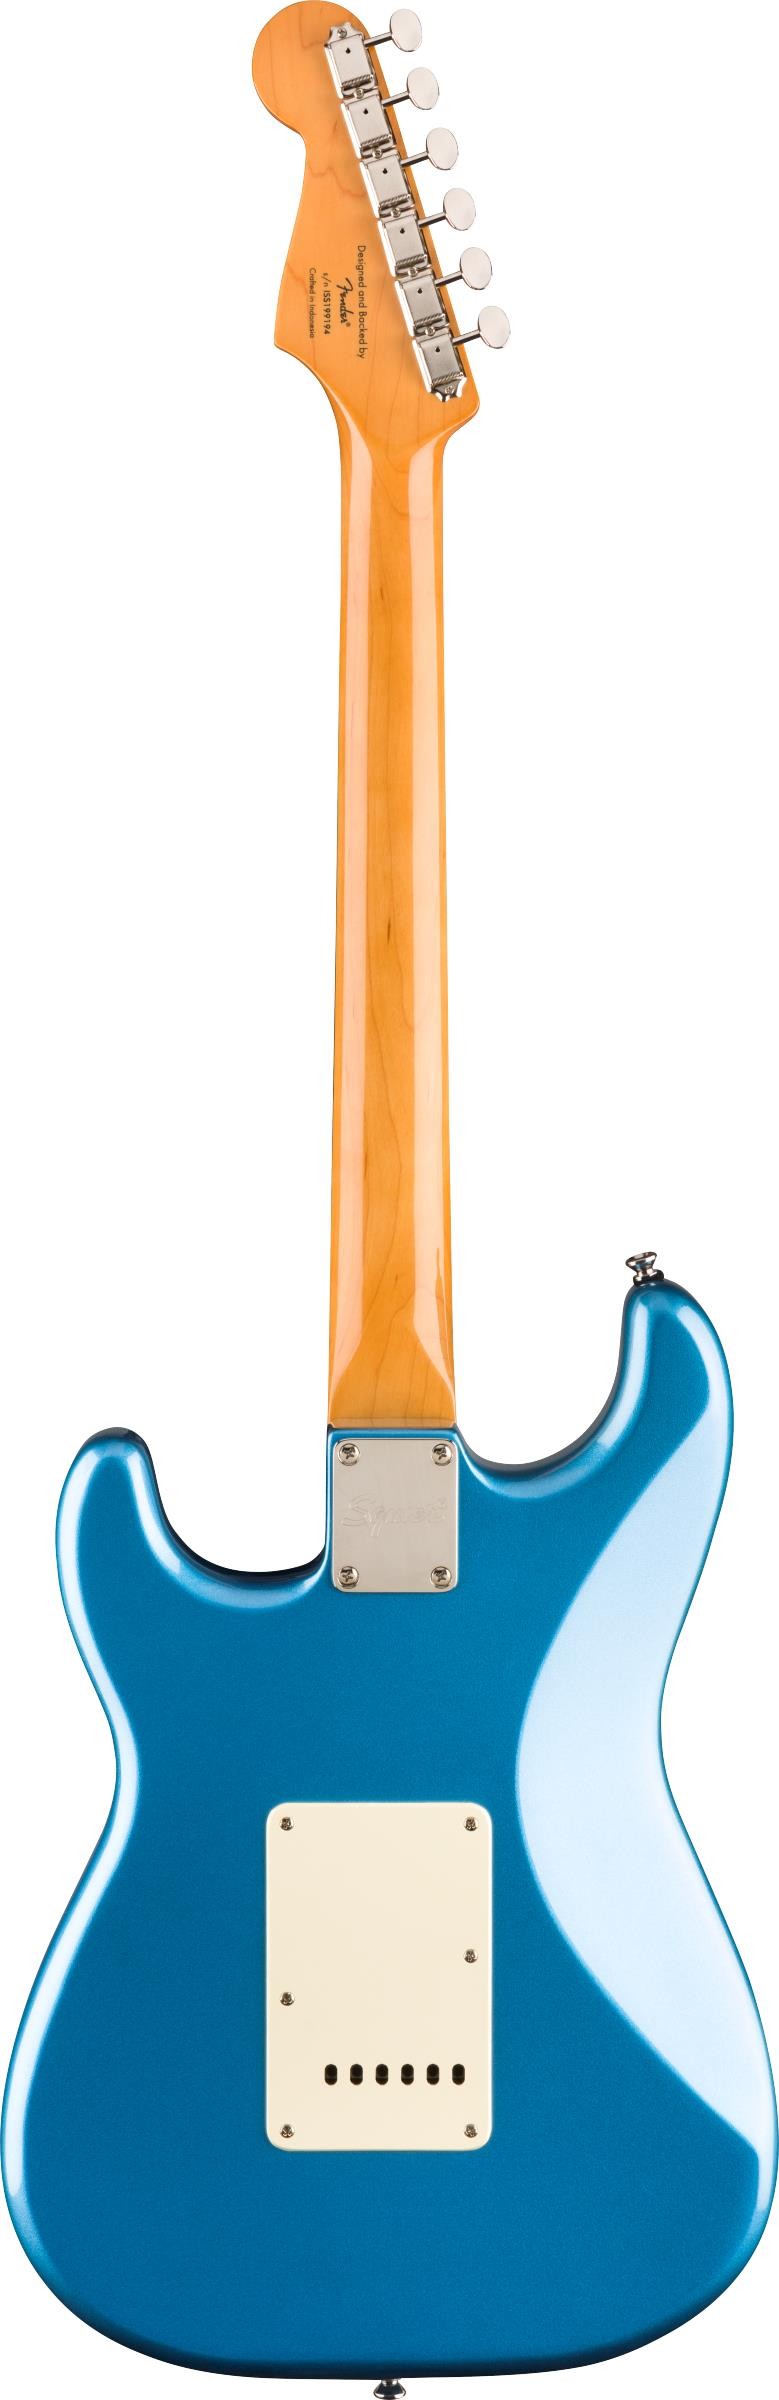 Squier Classic Vibe Stratocaster 60s Lake Placid Blue